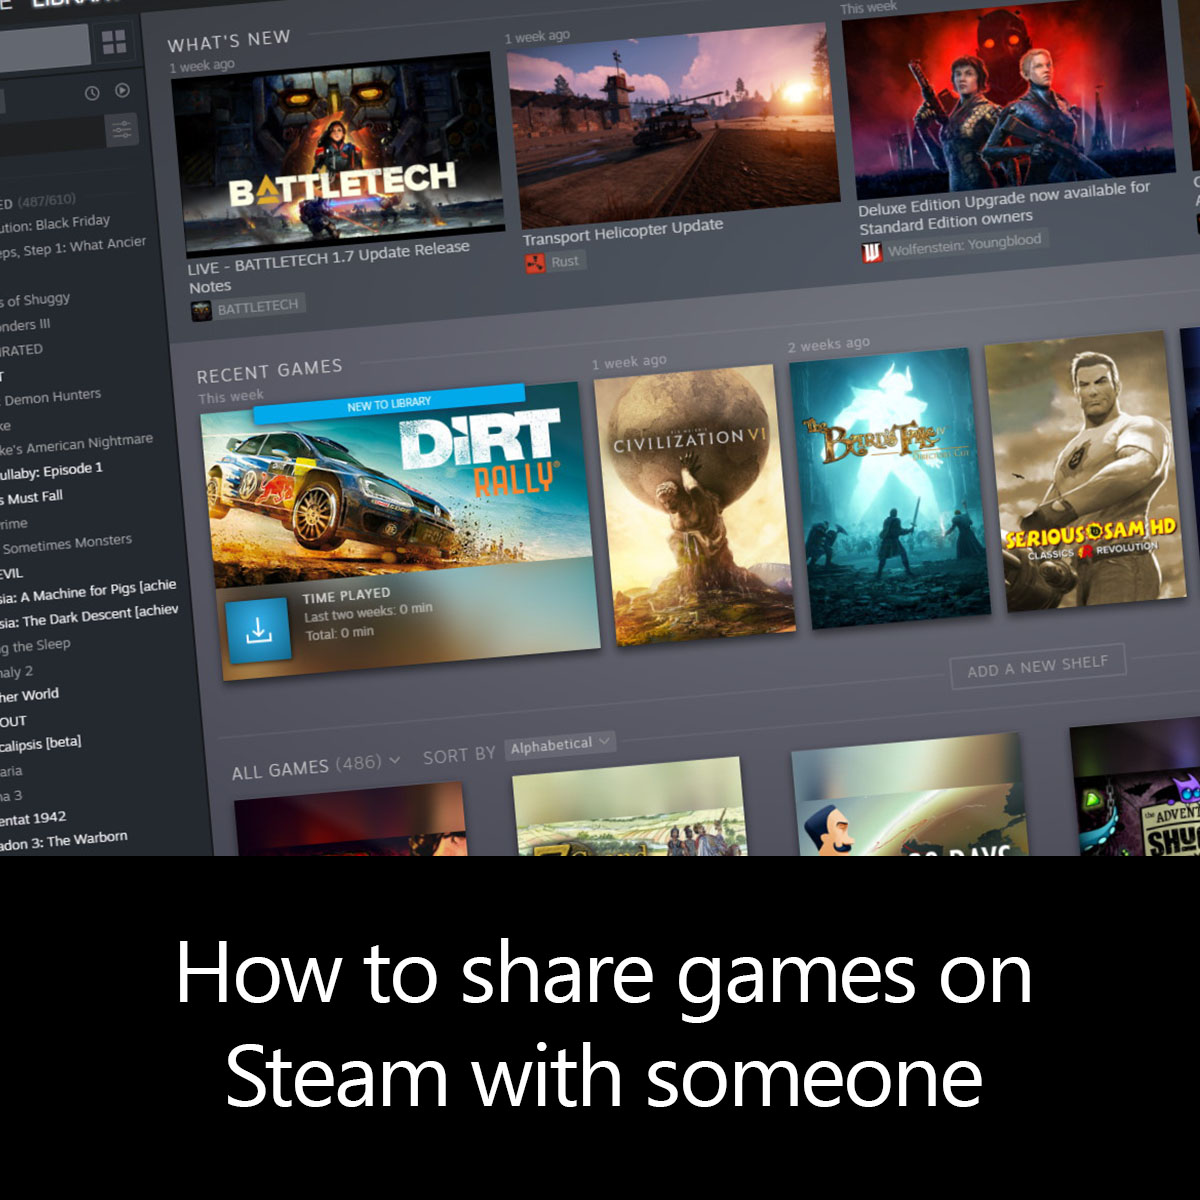 How to share games on Steam with someone